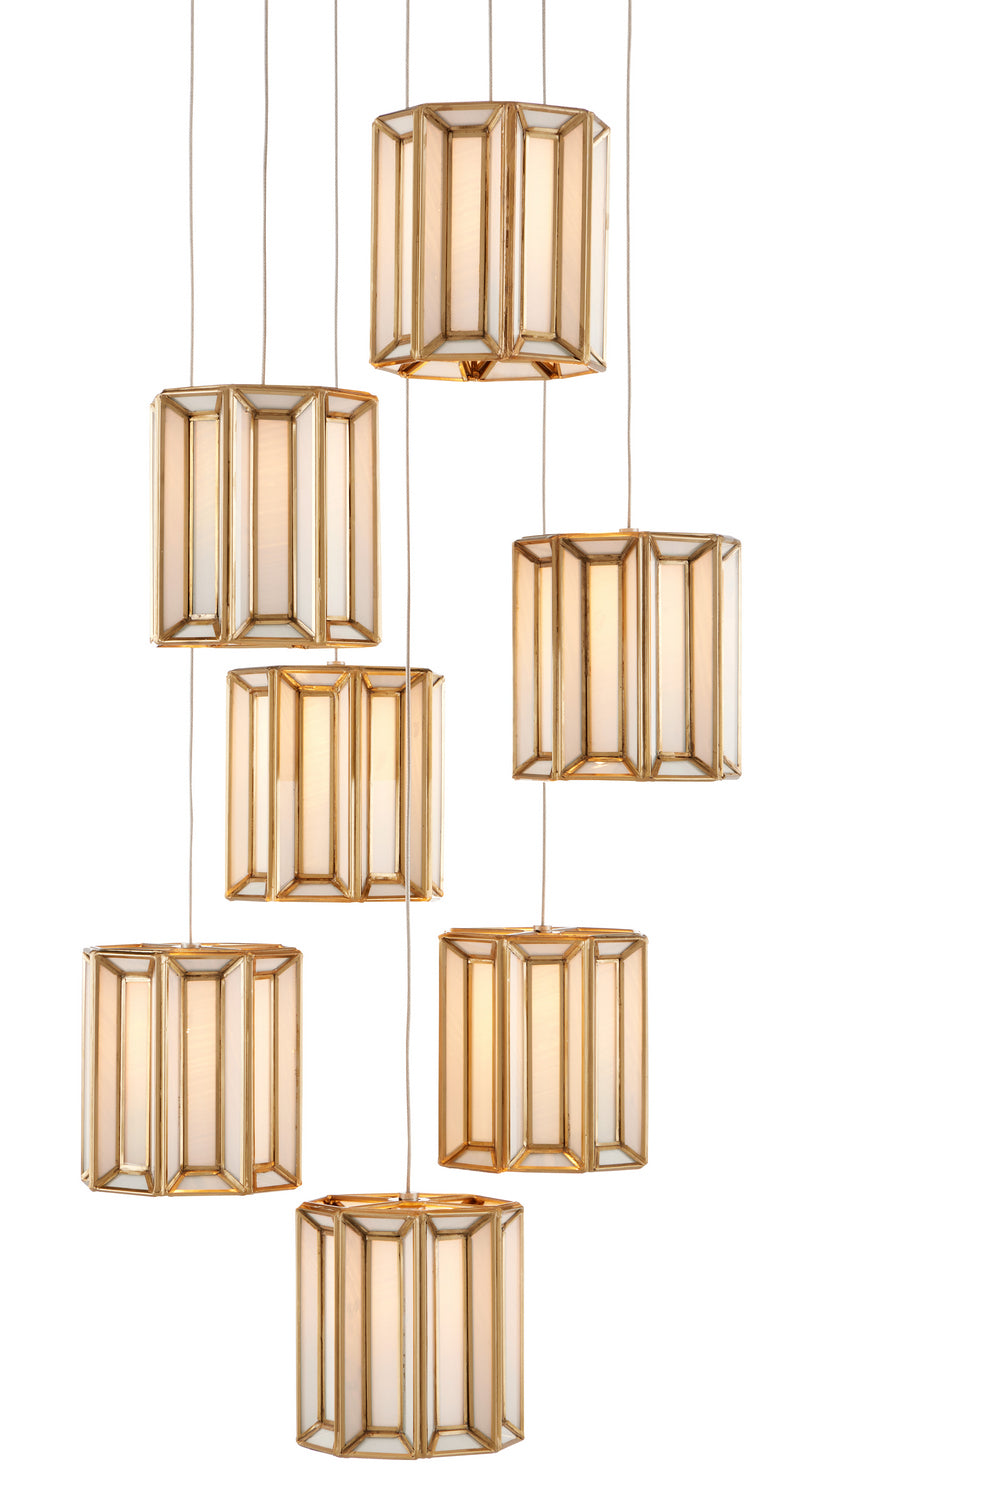 Seven Light Pendant from the Daze collection in Antique Brass/White/Painted Silver finish